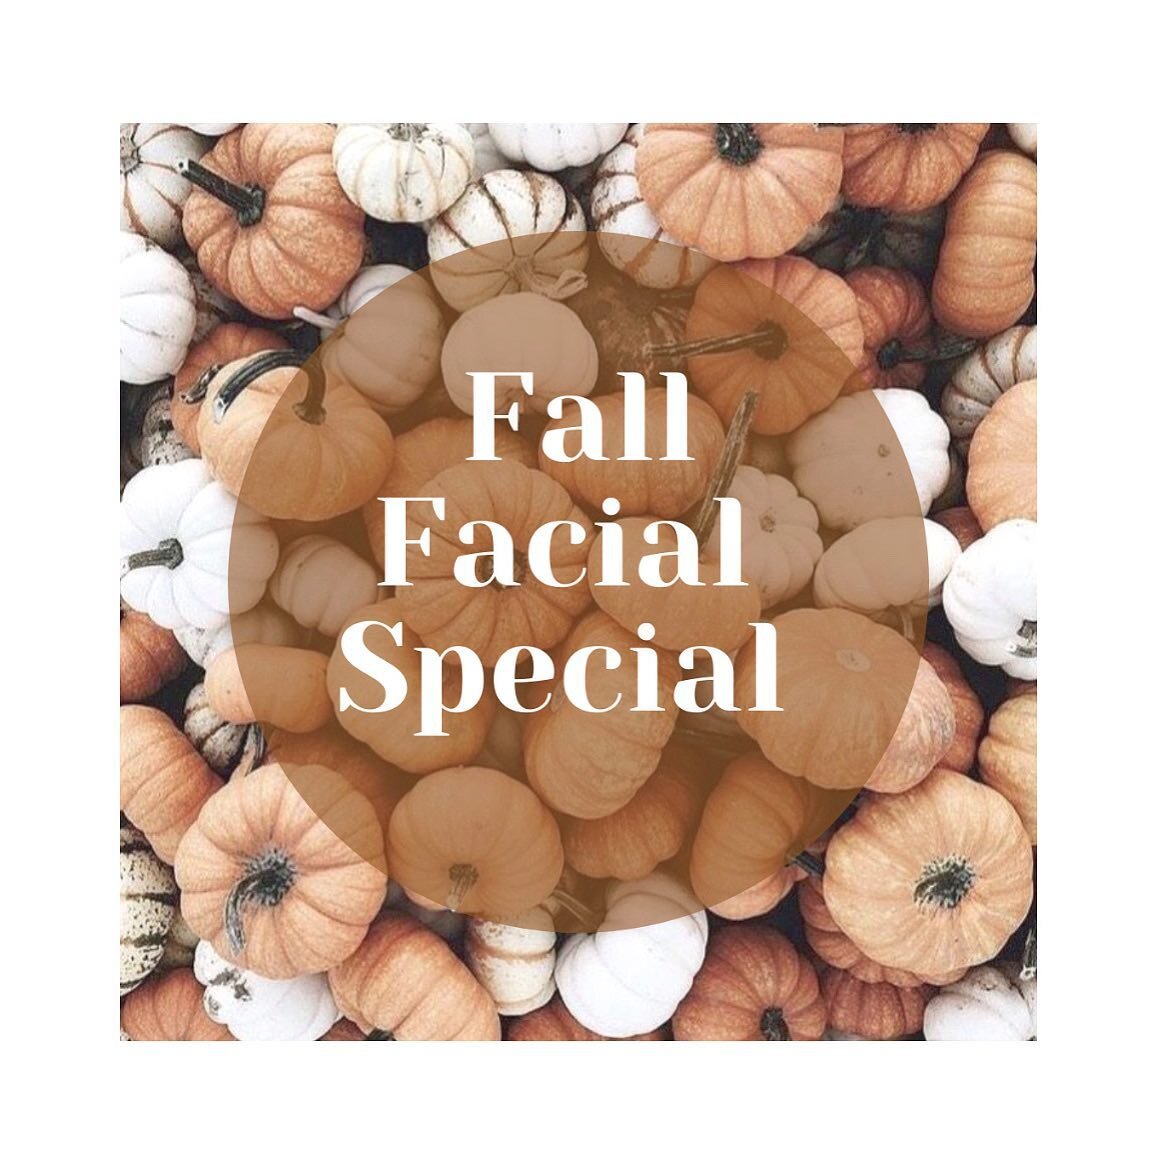 September 🎃 Special !!!!

I know I&rsquo;m early &amp; Fall technically doesn&rsquo;t start till a little later, but why not 🤷🏻&zwj;♀️ 

Tend to your skin health with a relaxing facial 🧖🧖&zwj;♀️ For the month of September I&rsquo;m offering 20% 